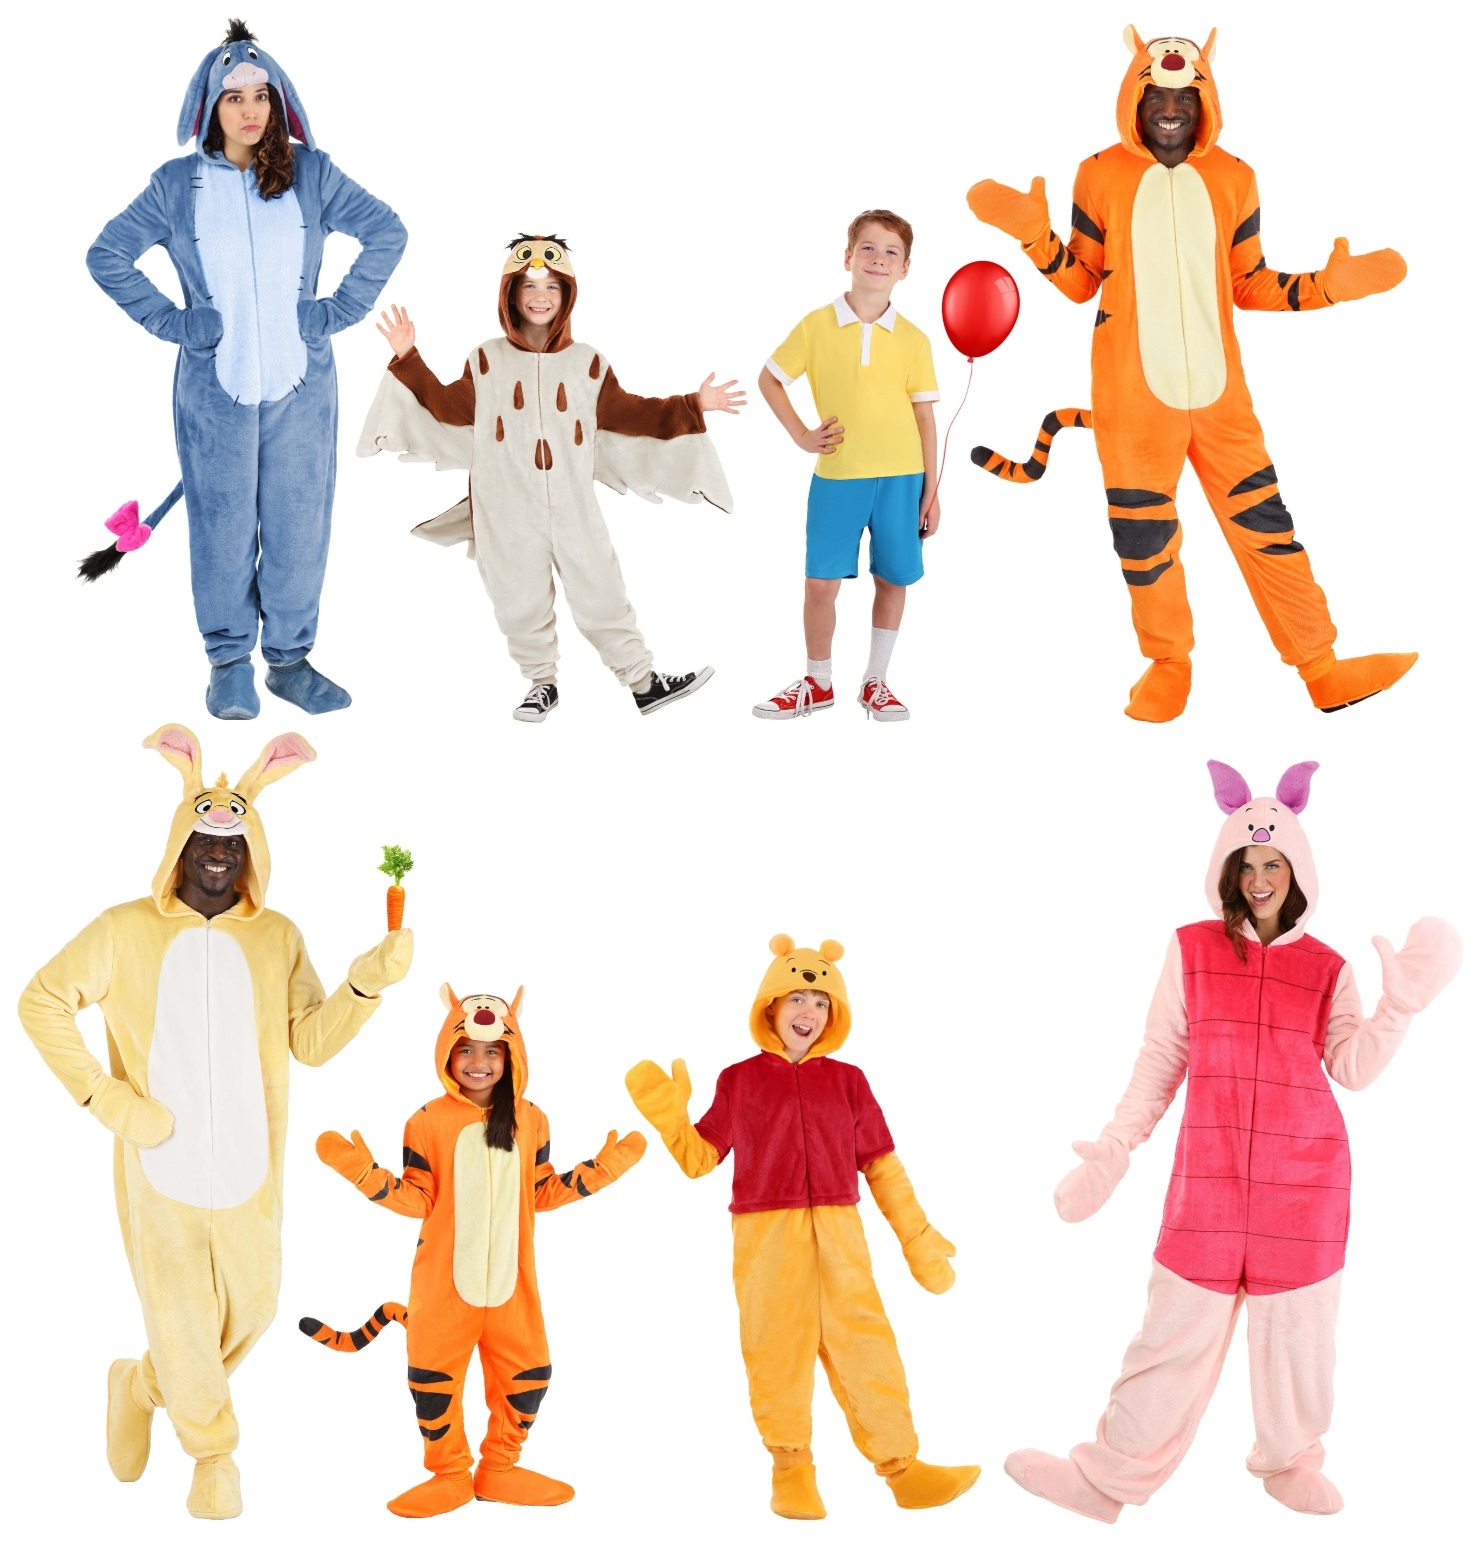 The Ultimate Cartoon Character Costumes for an Animated Saturday Morning [ Costume Guide] -  Blog